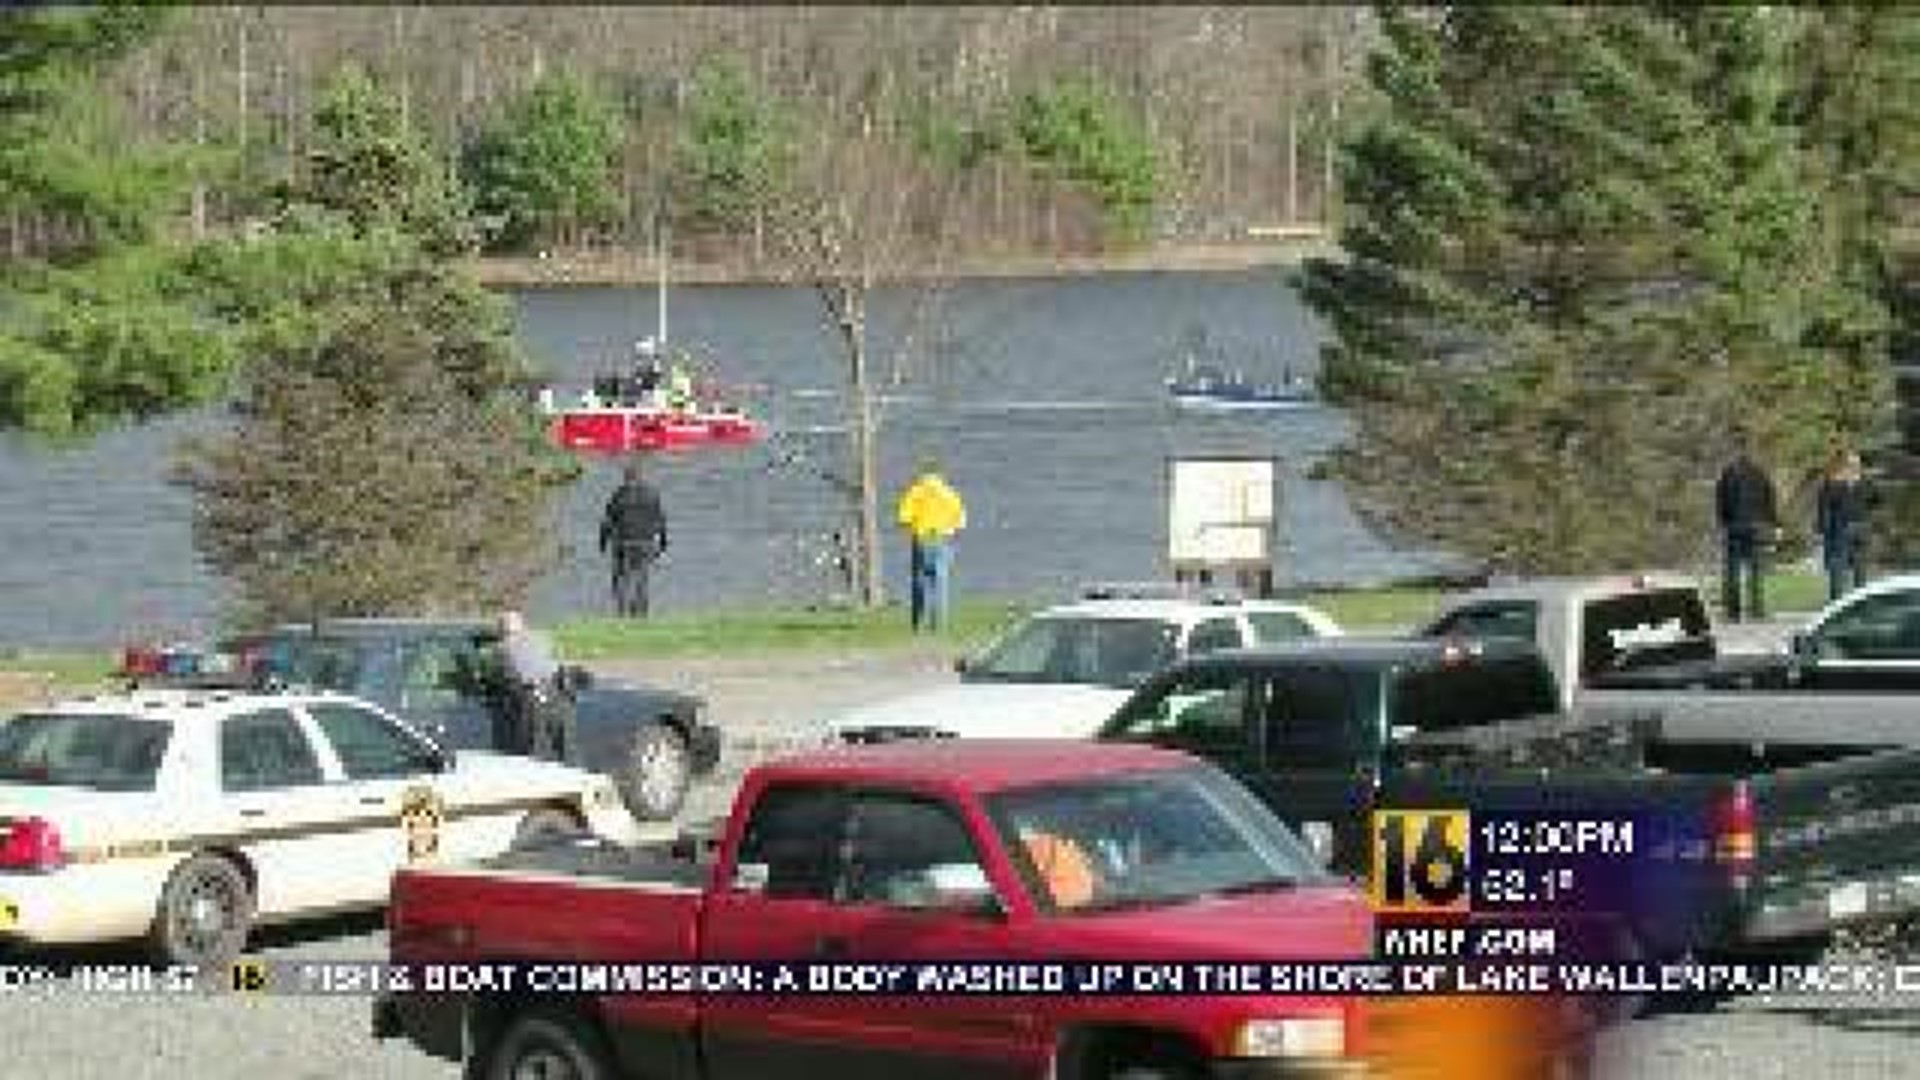 Body Discovered At Lake Wallenpaupack